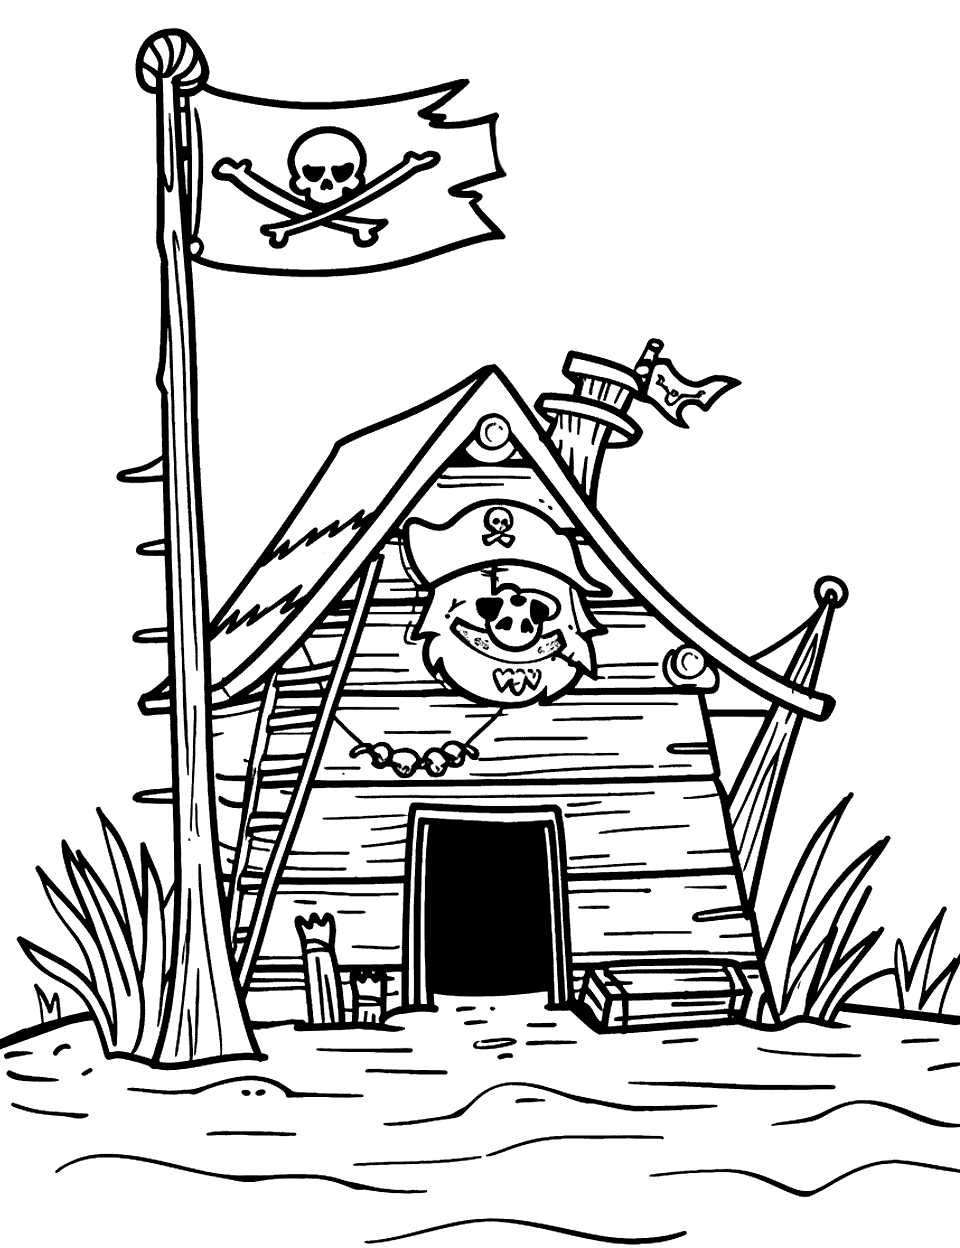 Castaway Pirate’s Shelter Pirate Coloring Page - A makeshift shelter on a deserted island, with a pirate flag.